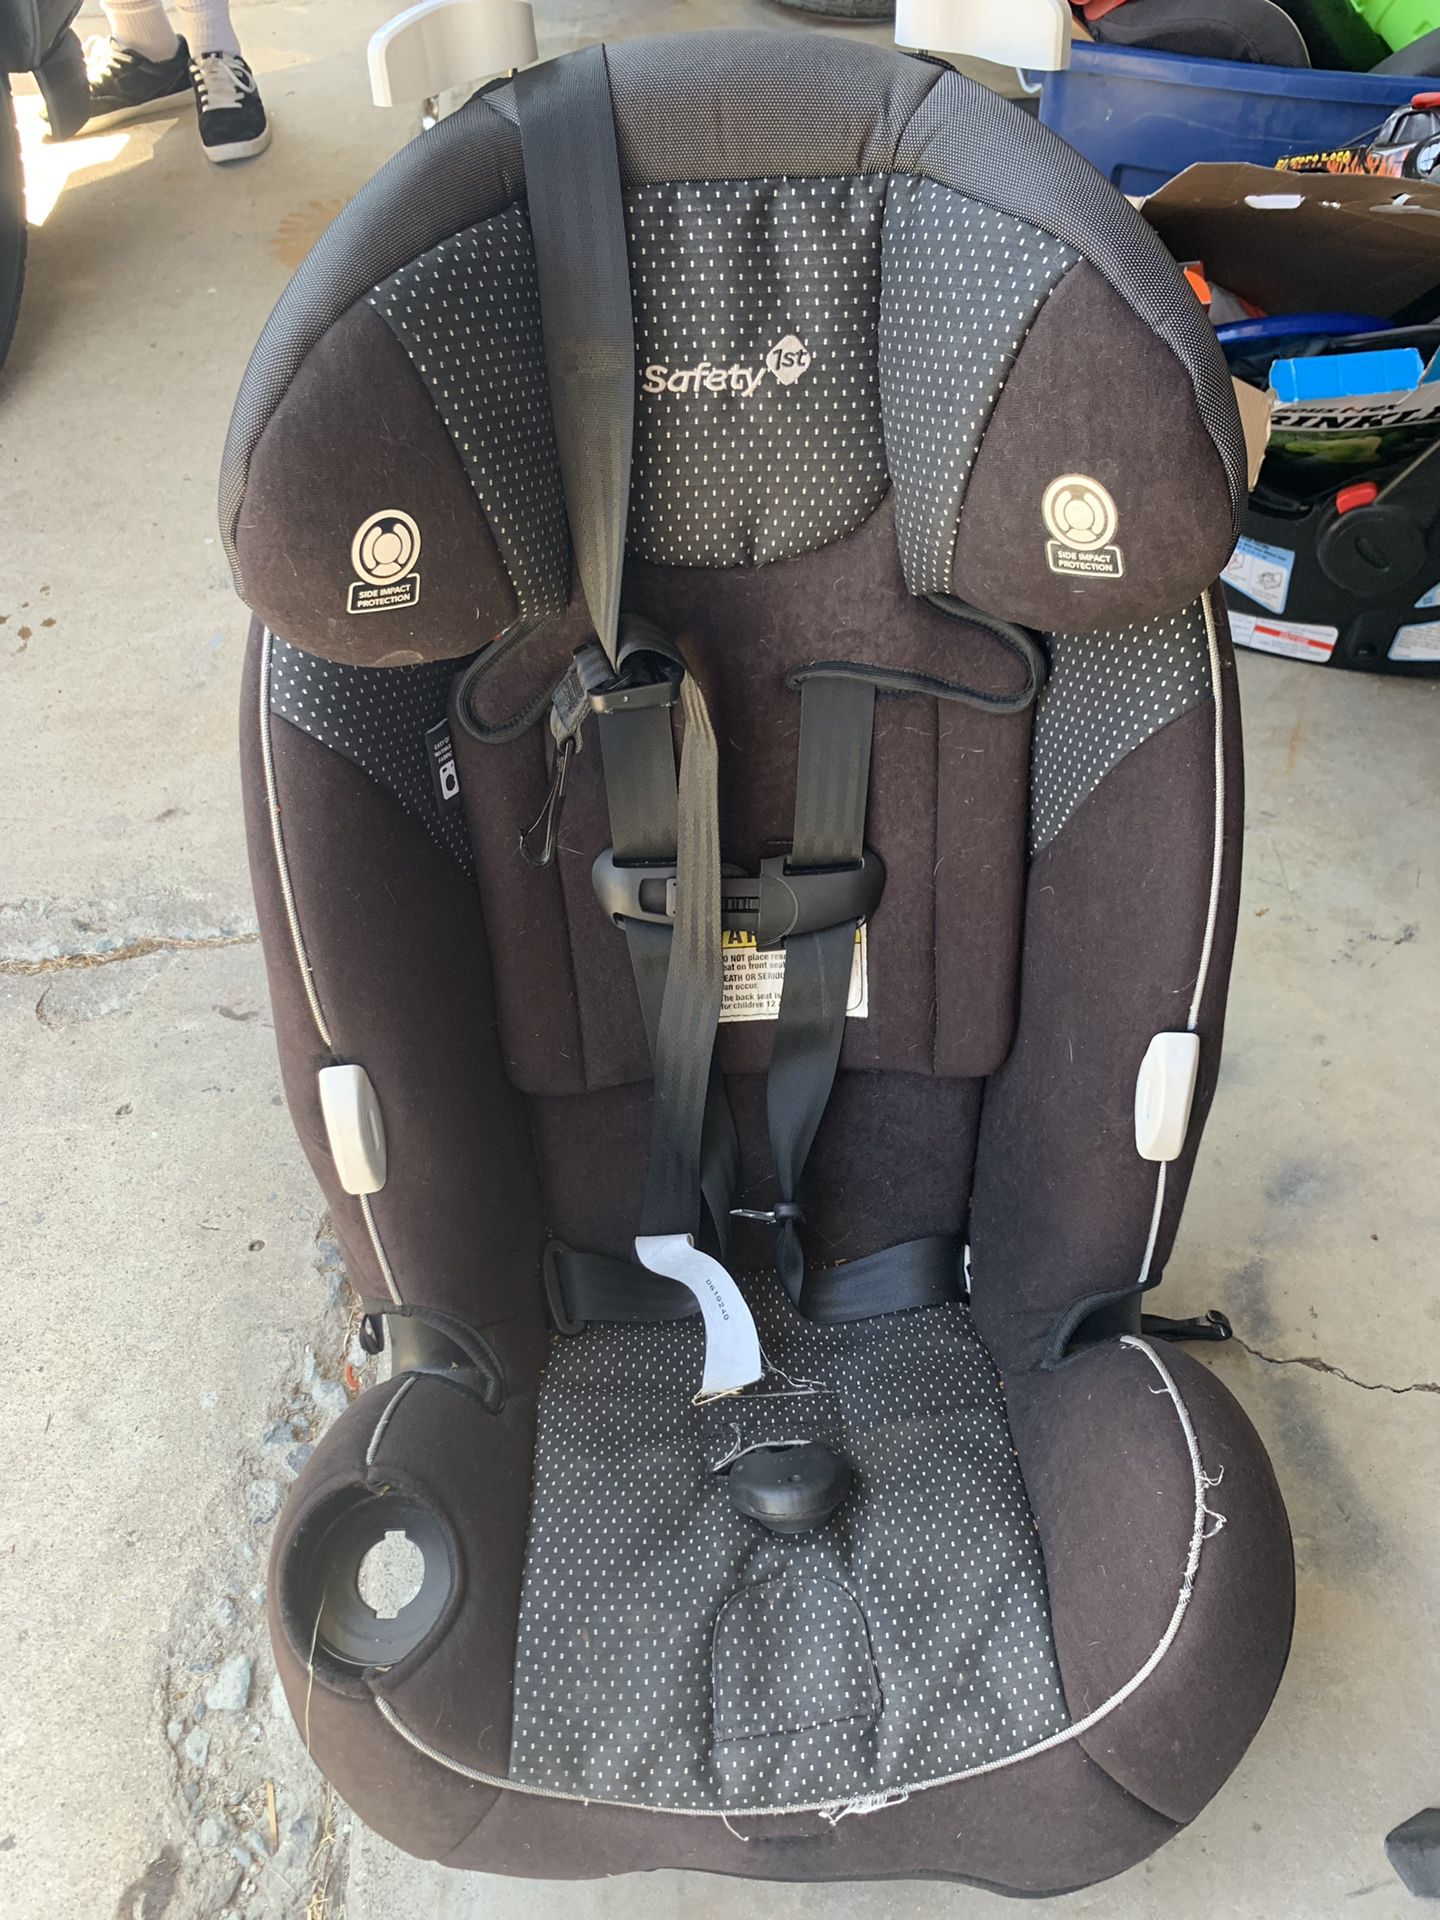 Safety 1st rear or front facing car seat. 2 years old bought in 2017